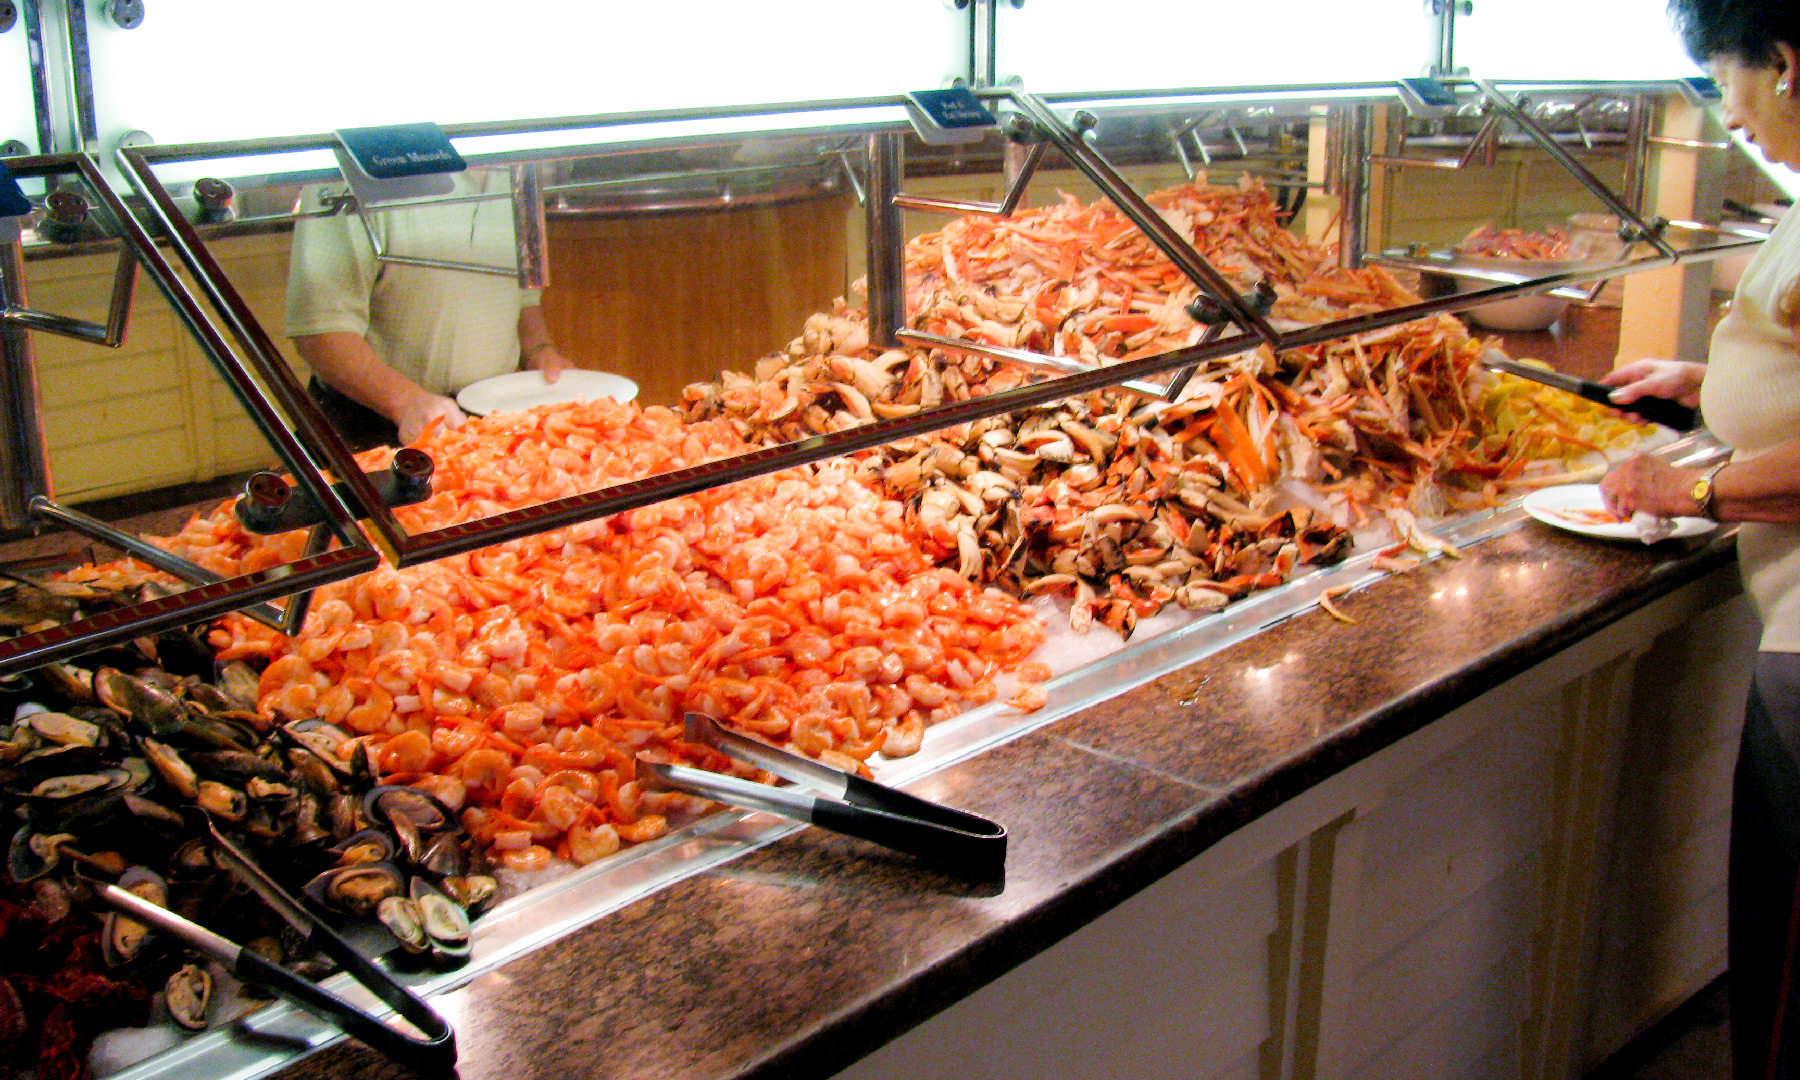 Working at an All-You-Can-Eat Buffet Comes with Unlimited Craziness